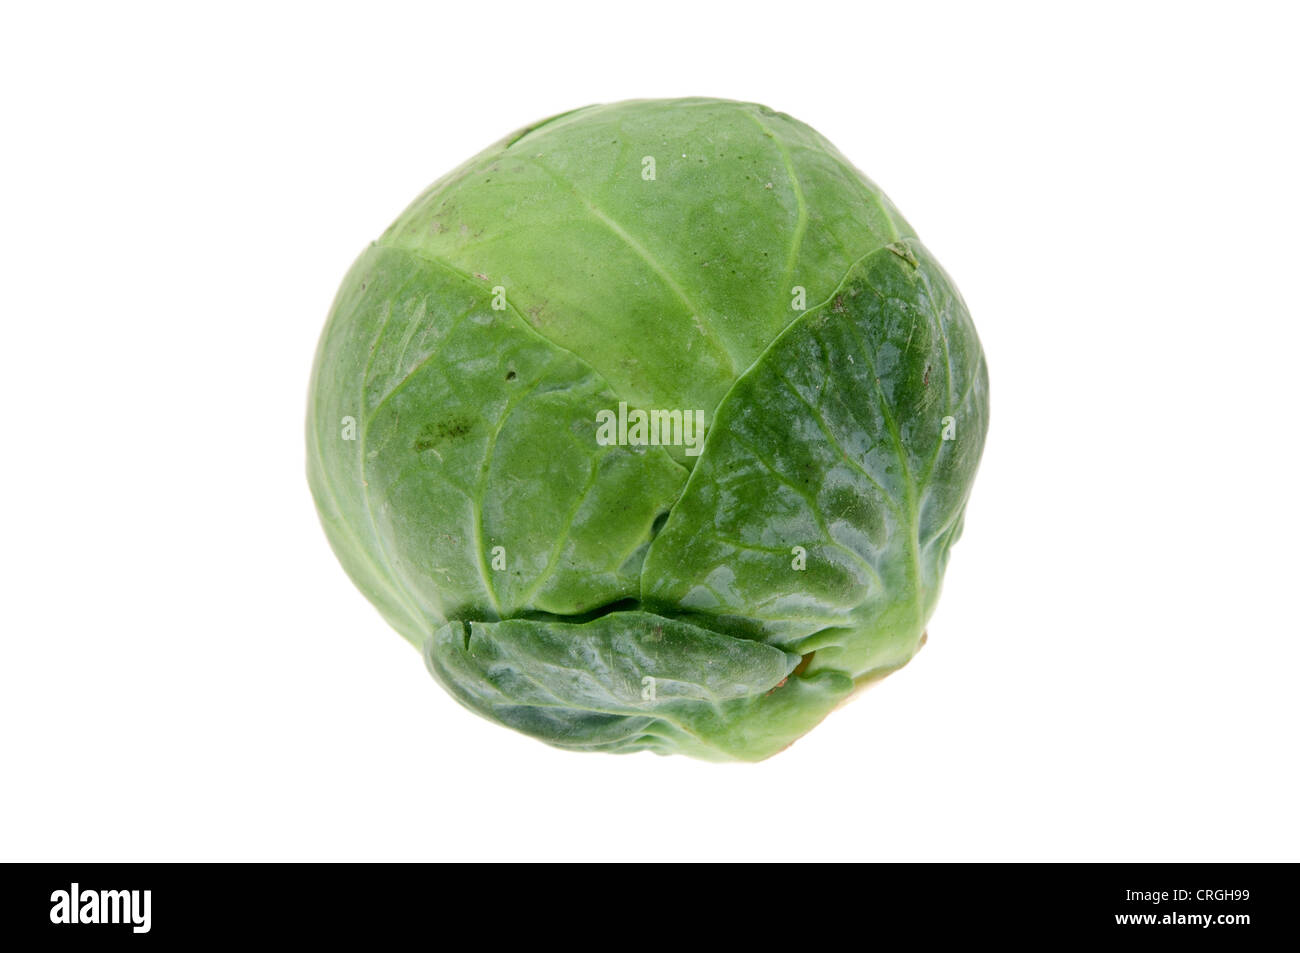 Single brussels sprout - studio shot with a white background Stock Photo